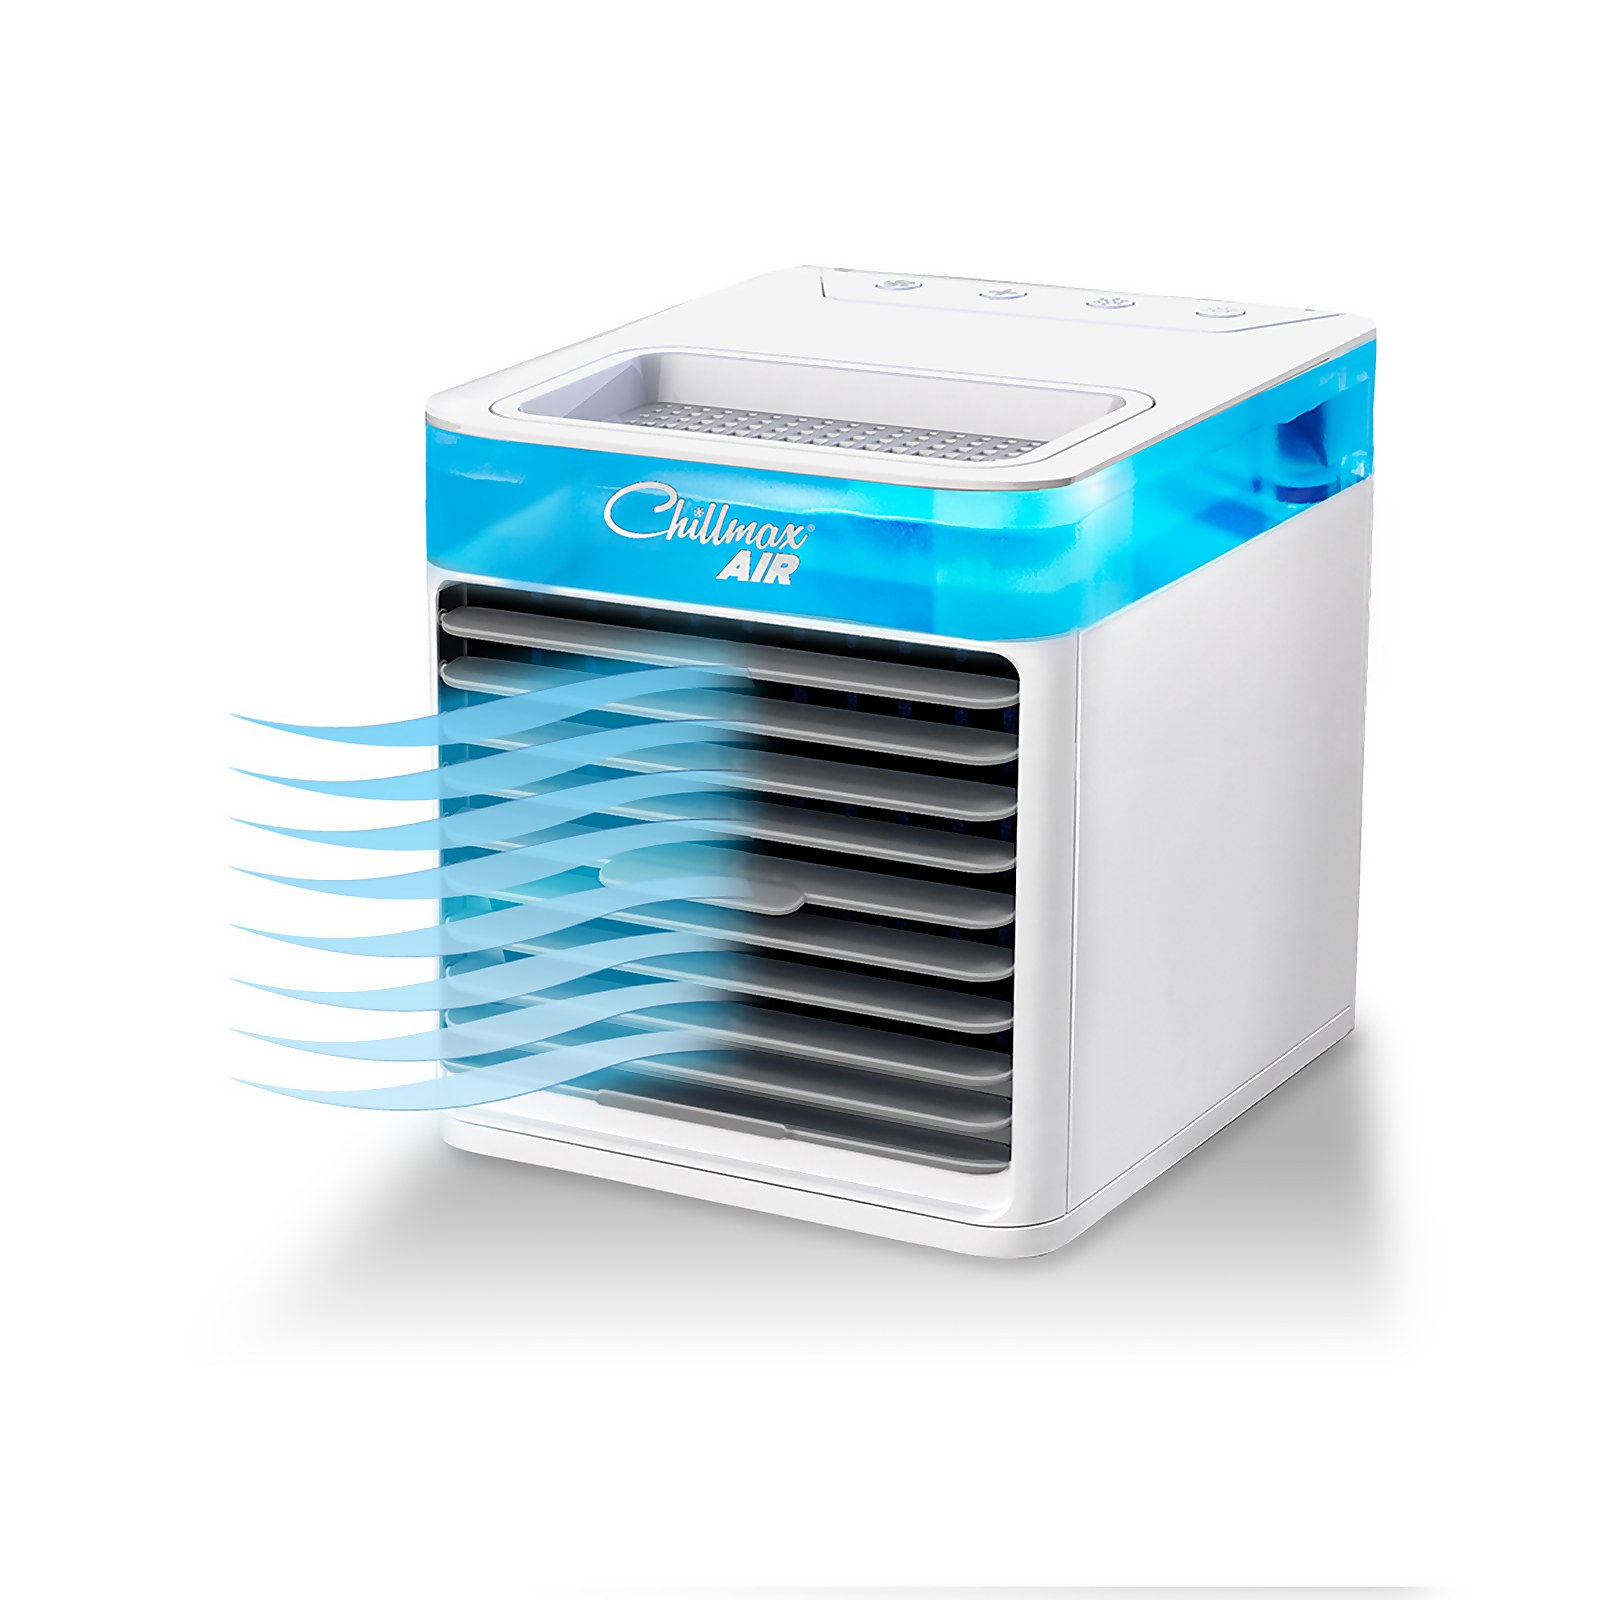 Chill Max Air Pure Chill 2.0 Personal Air Cooler and Humidifier